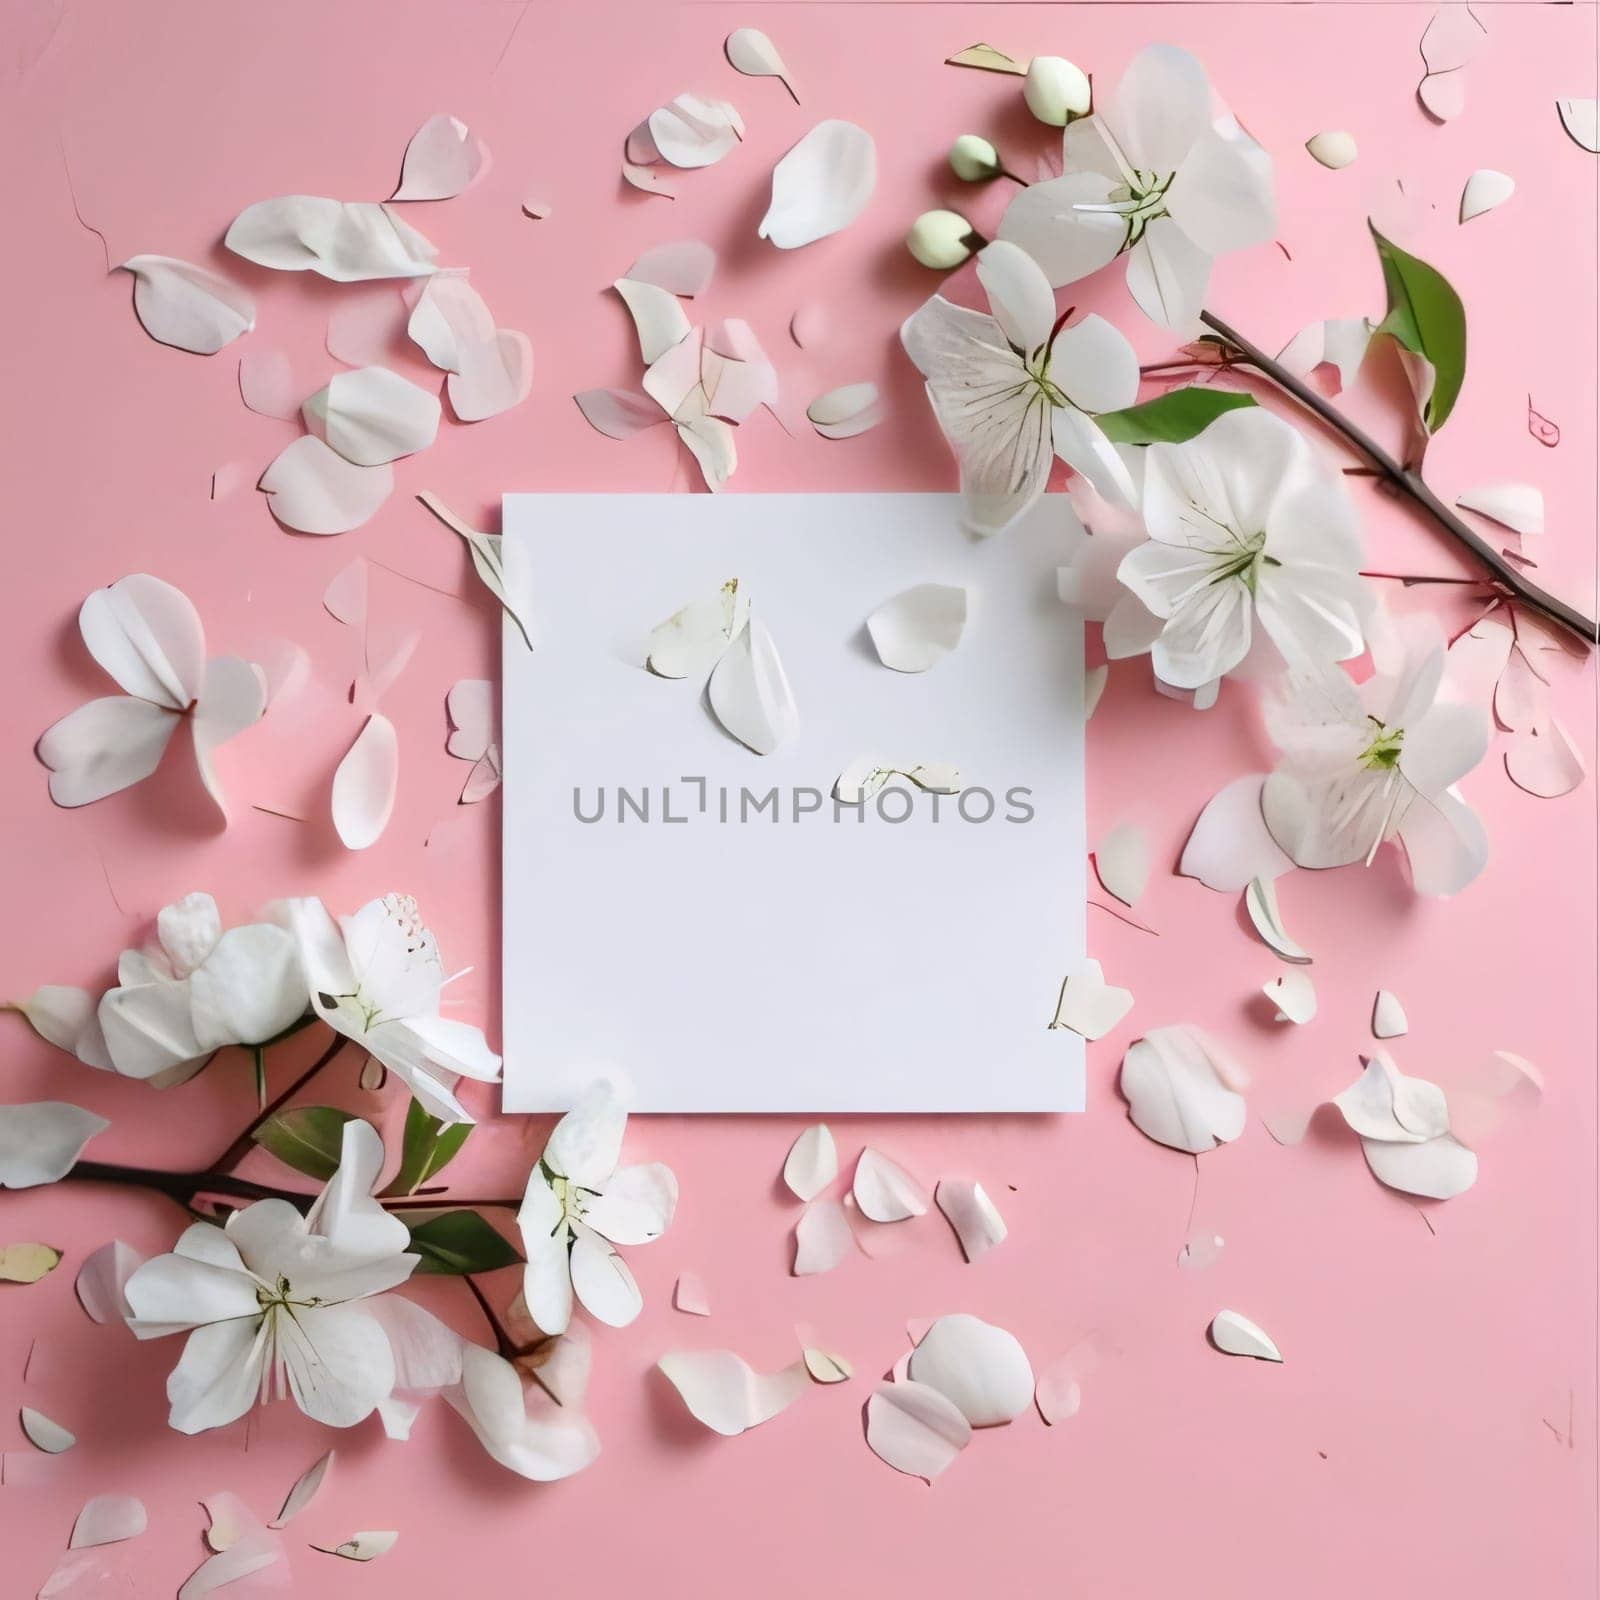 White blank card on a pink background around scattered white flower petals. Places on their own content. Flowering flowers, a symbol of spring, new life. A joyful time of nature waking up to life.